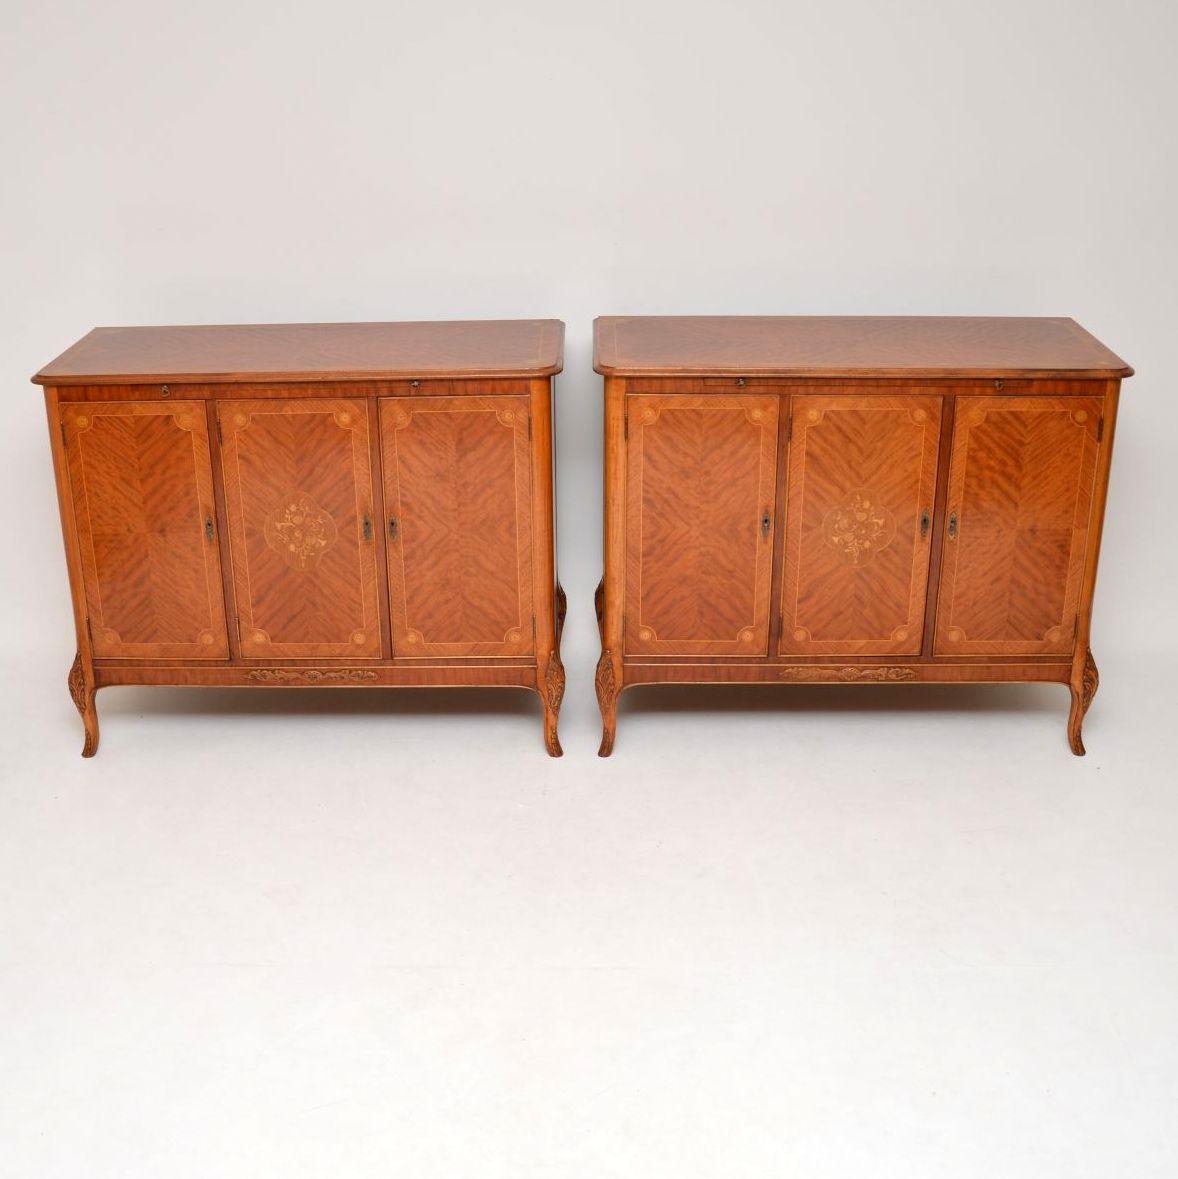 It’s very rare to find a matching pair of antique cabinets of this quality, especially in king wood and with such fabulous interiors. These cabinets are antique French style and in excellent condition, having just been polished and I would date them